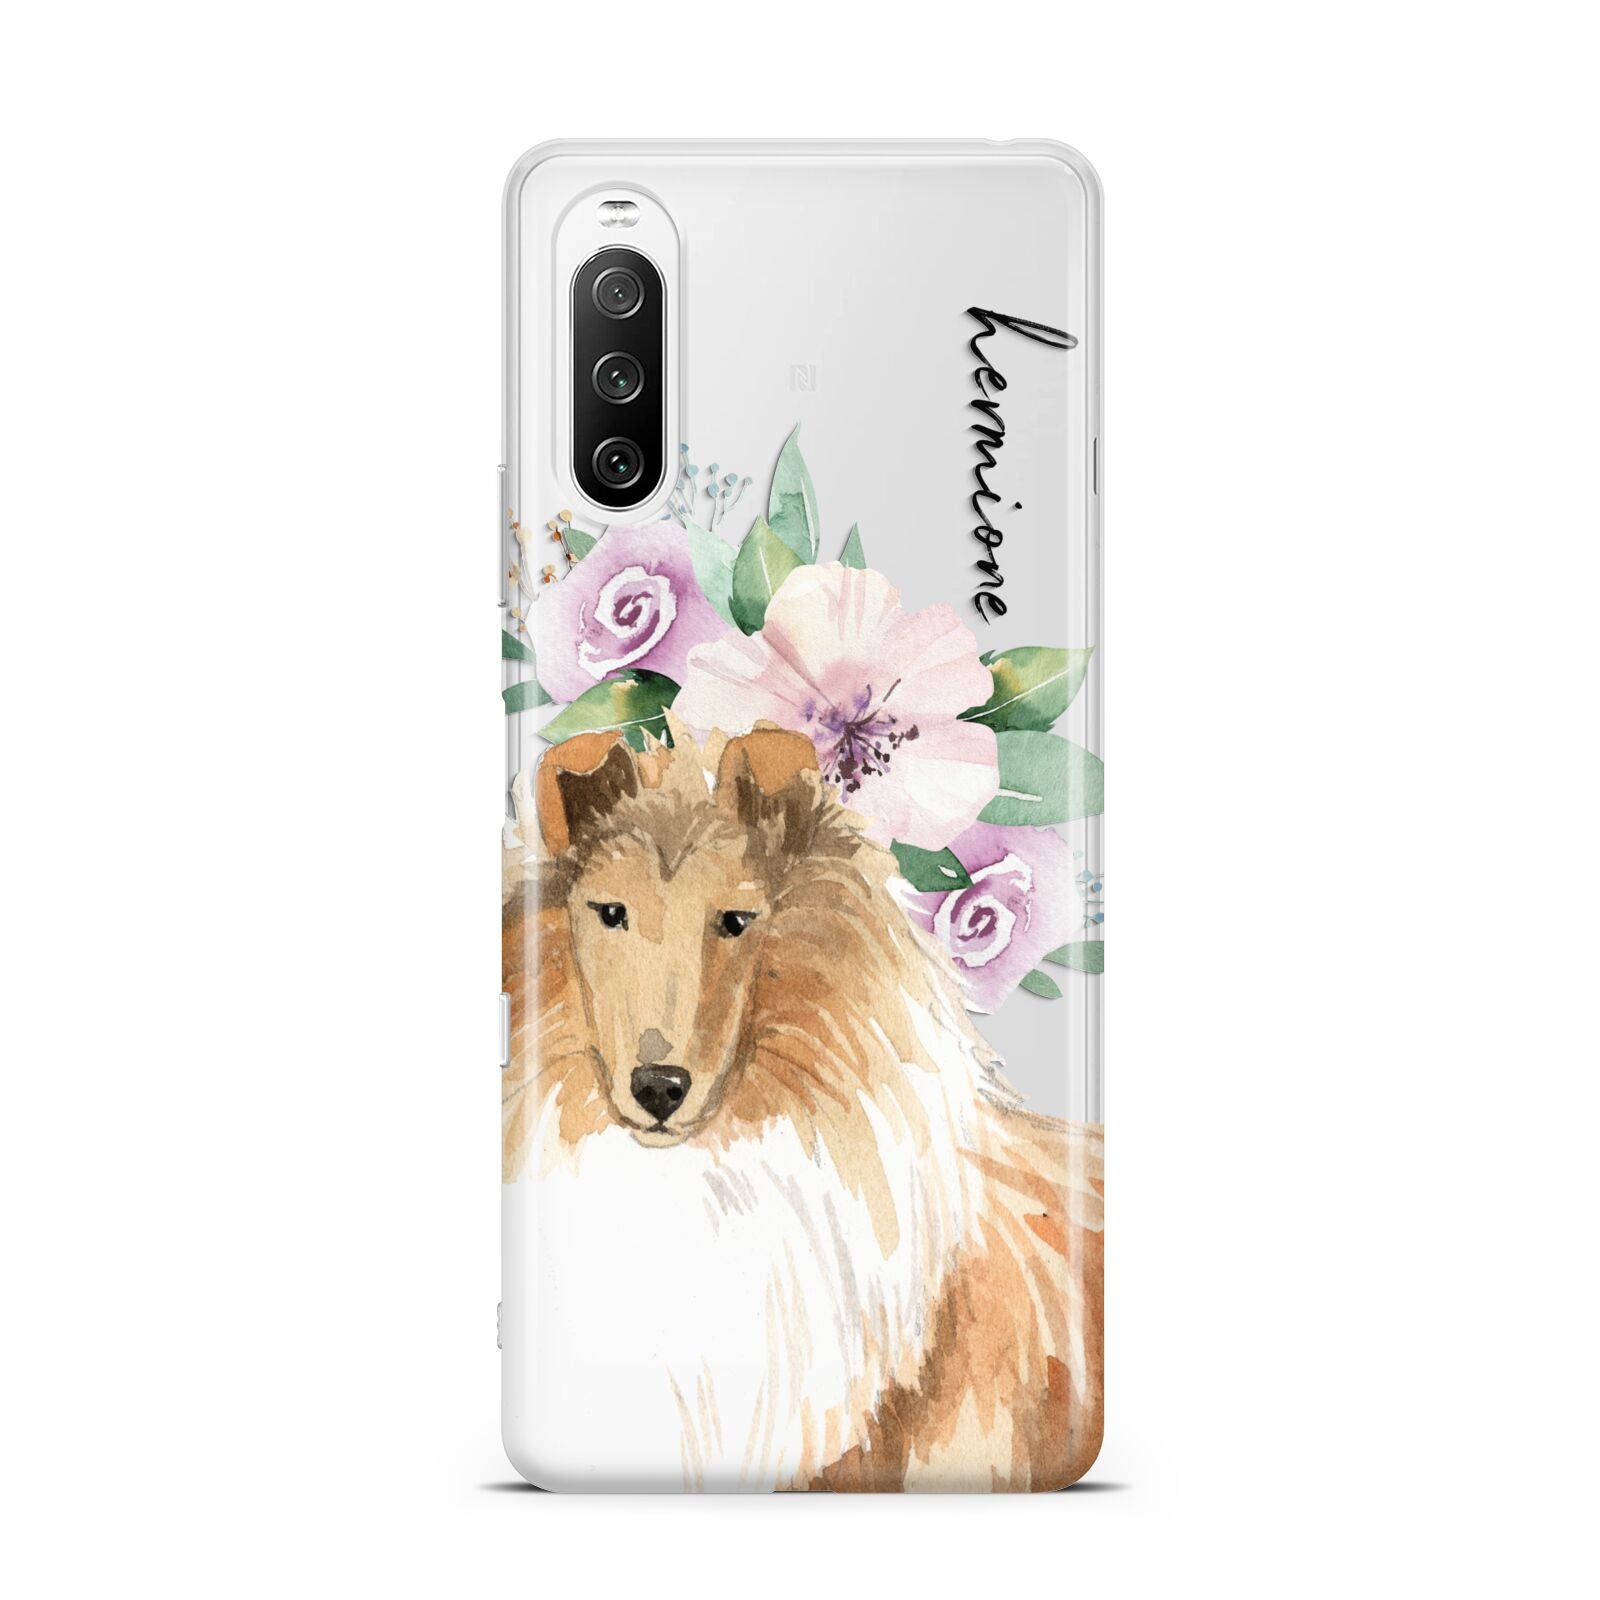 Personalised Rough Collie Sony Xperia 10 III Case